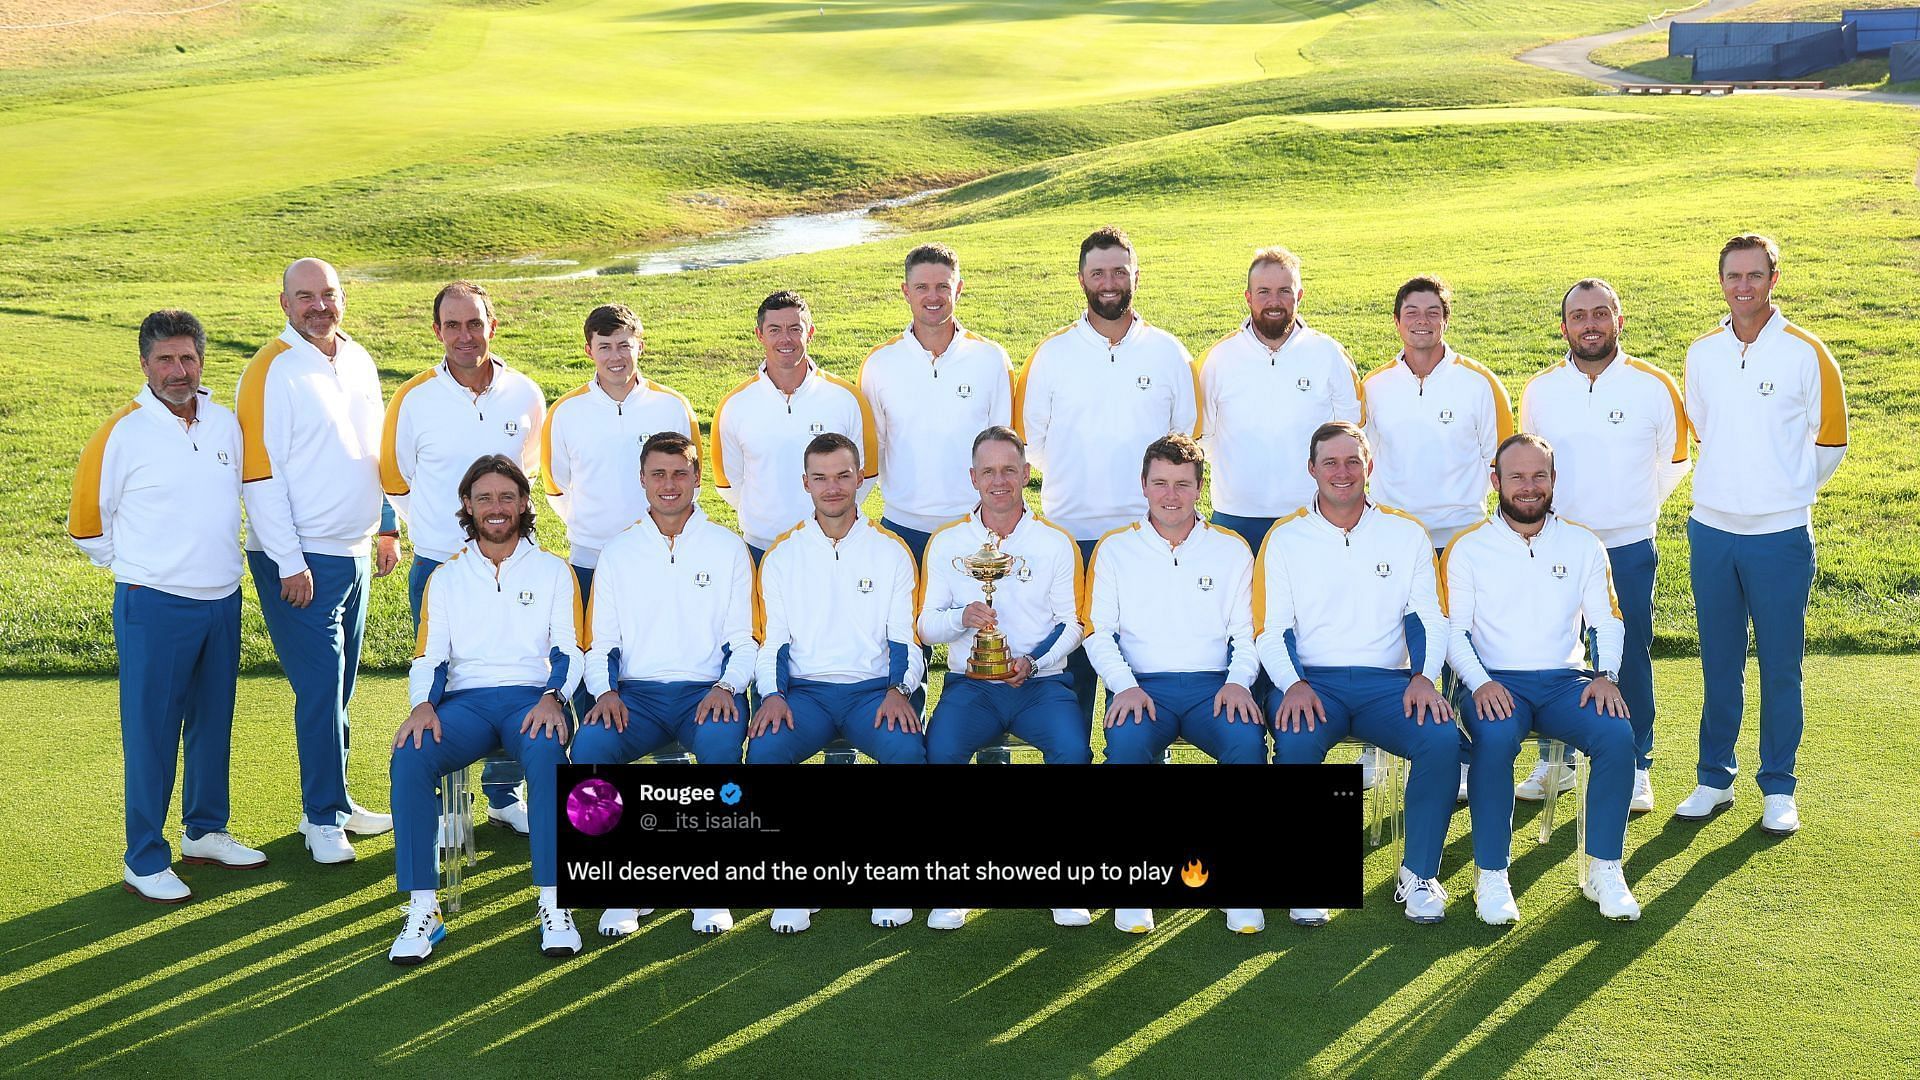 “Only team that showed up to play” Fans congratulate Team Europe for a